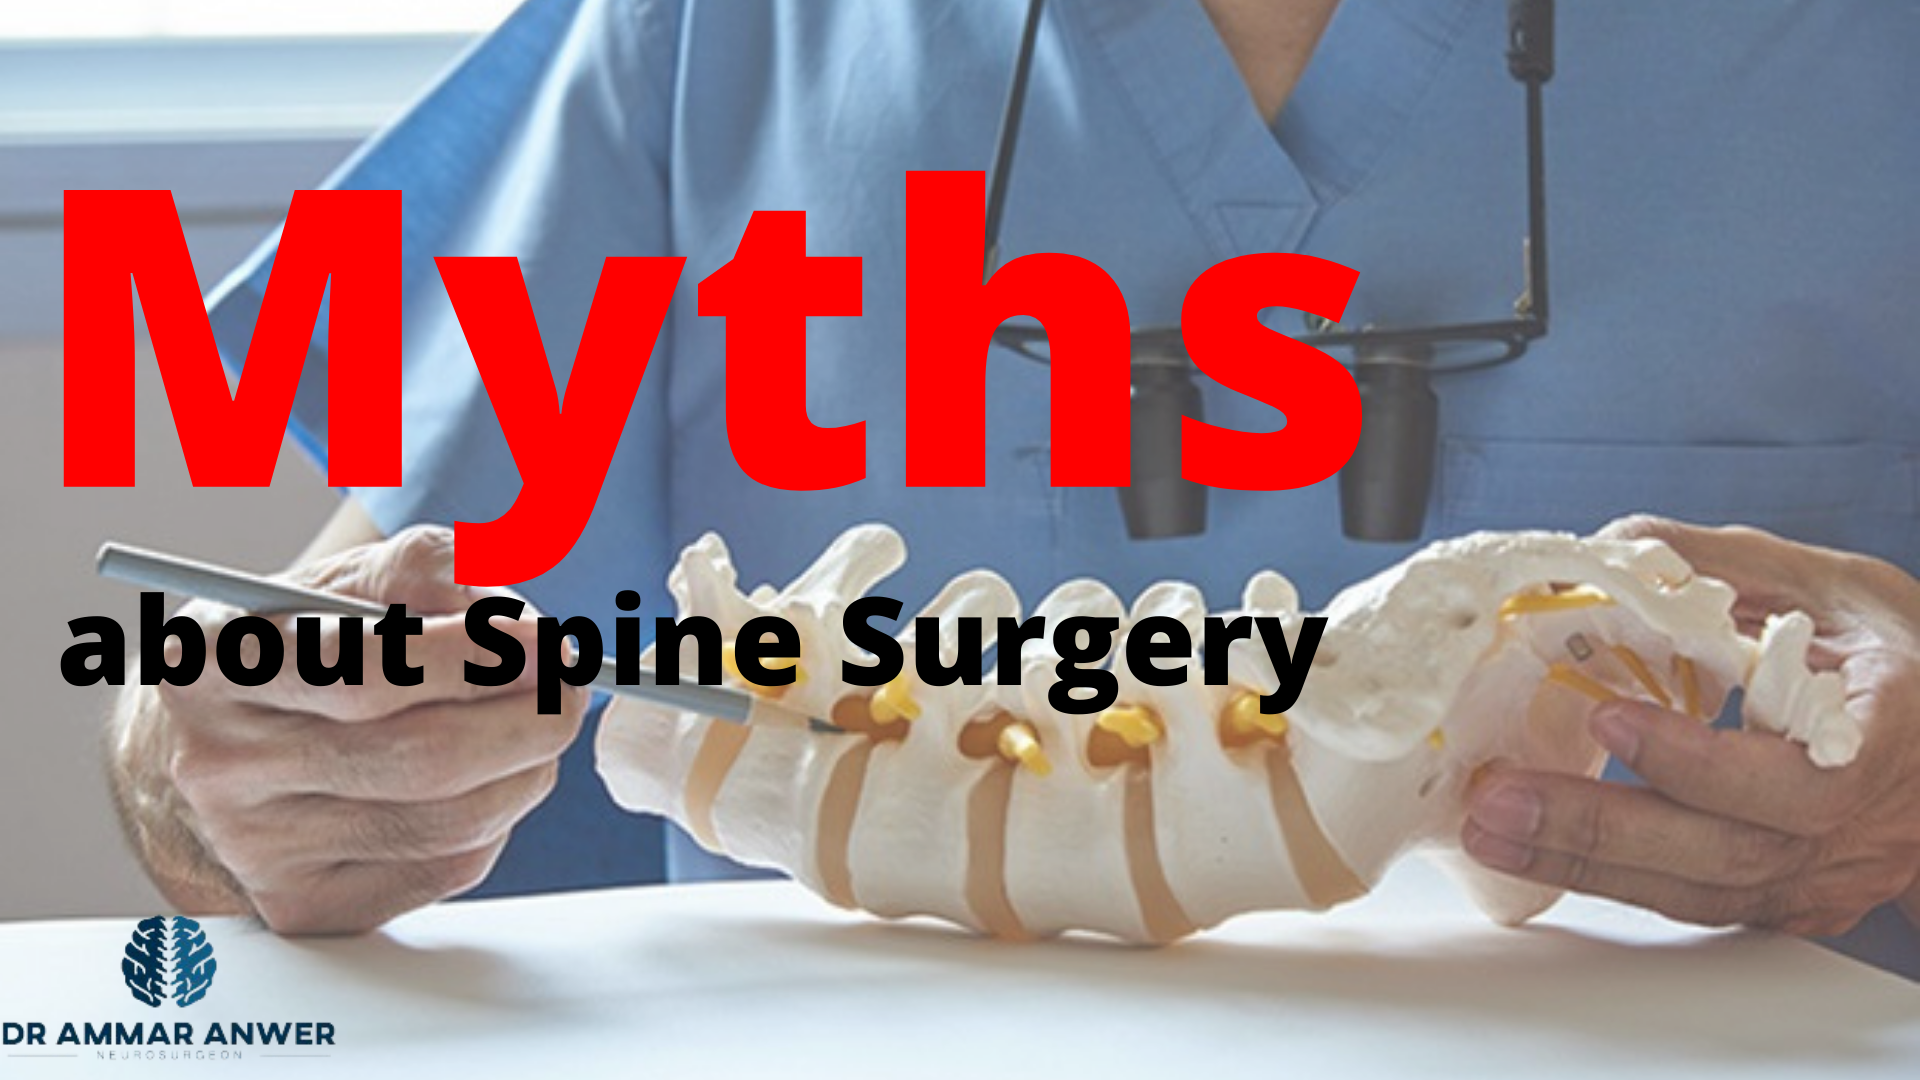 Myths about spine surgery